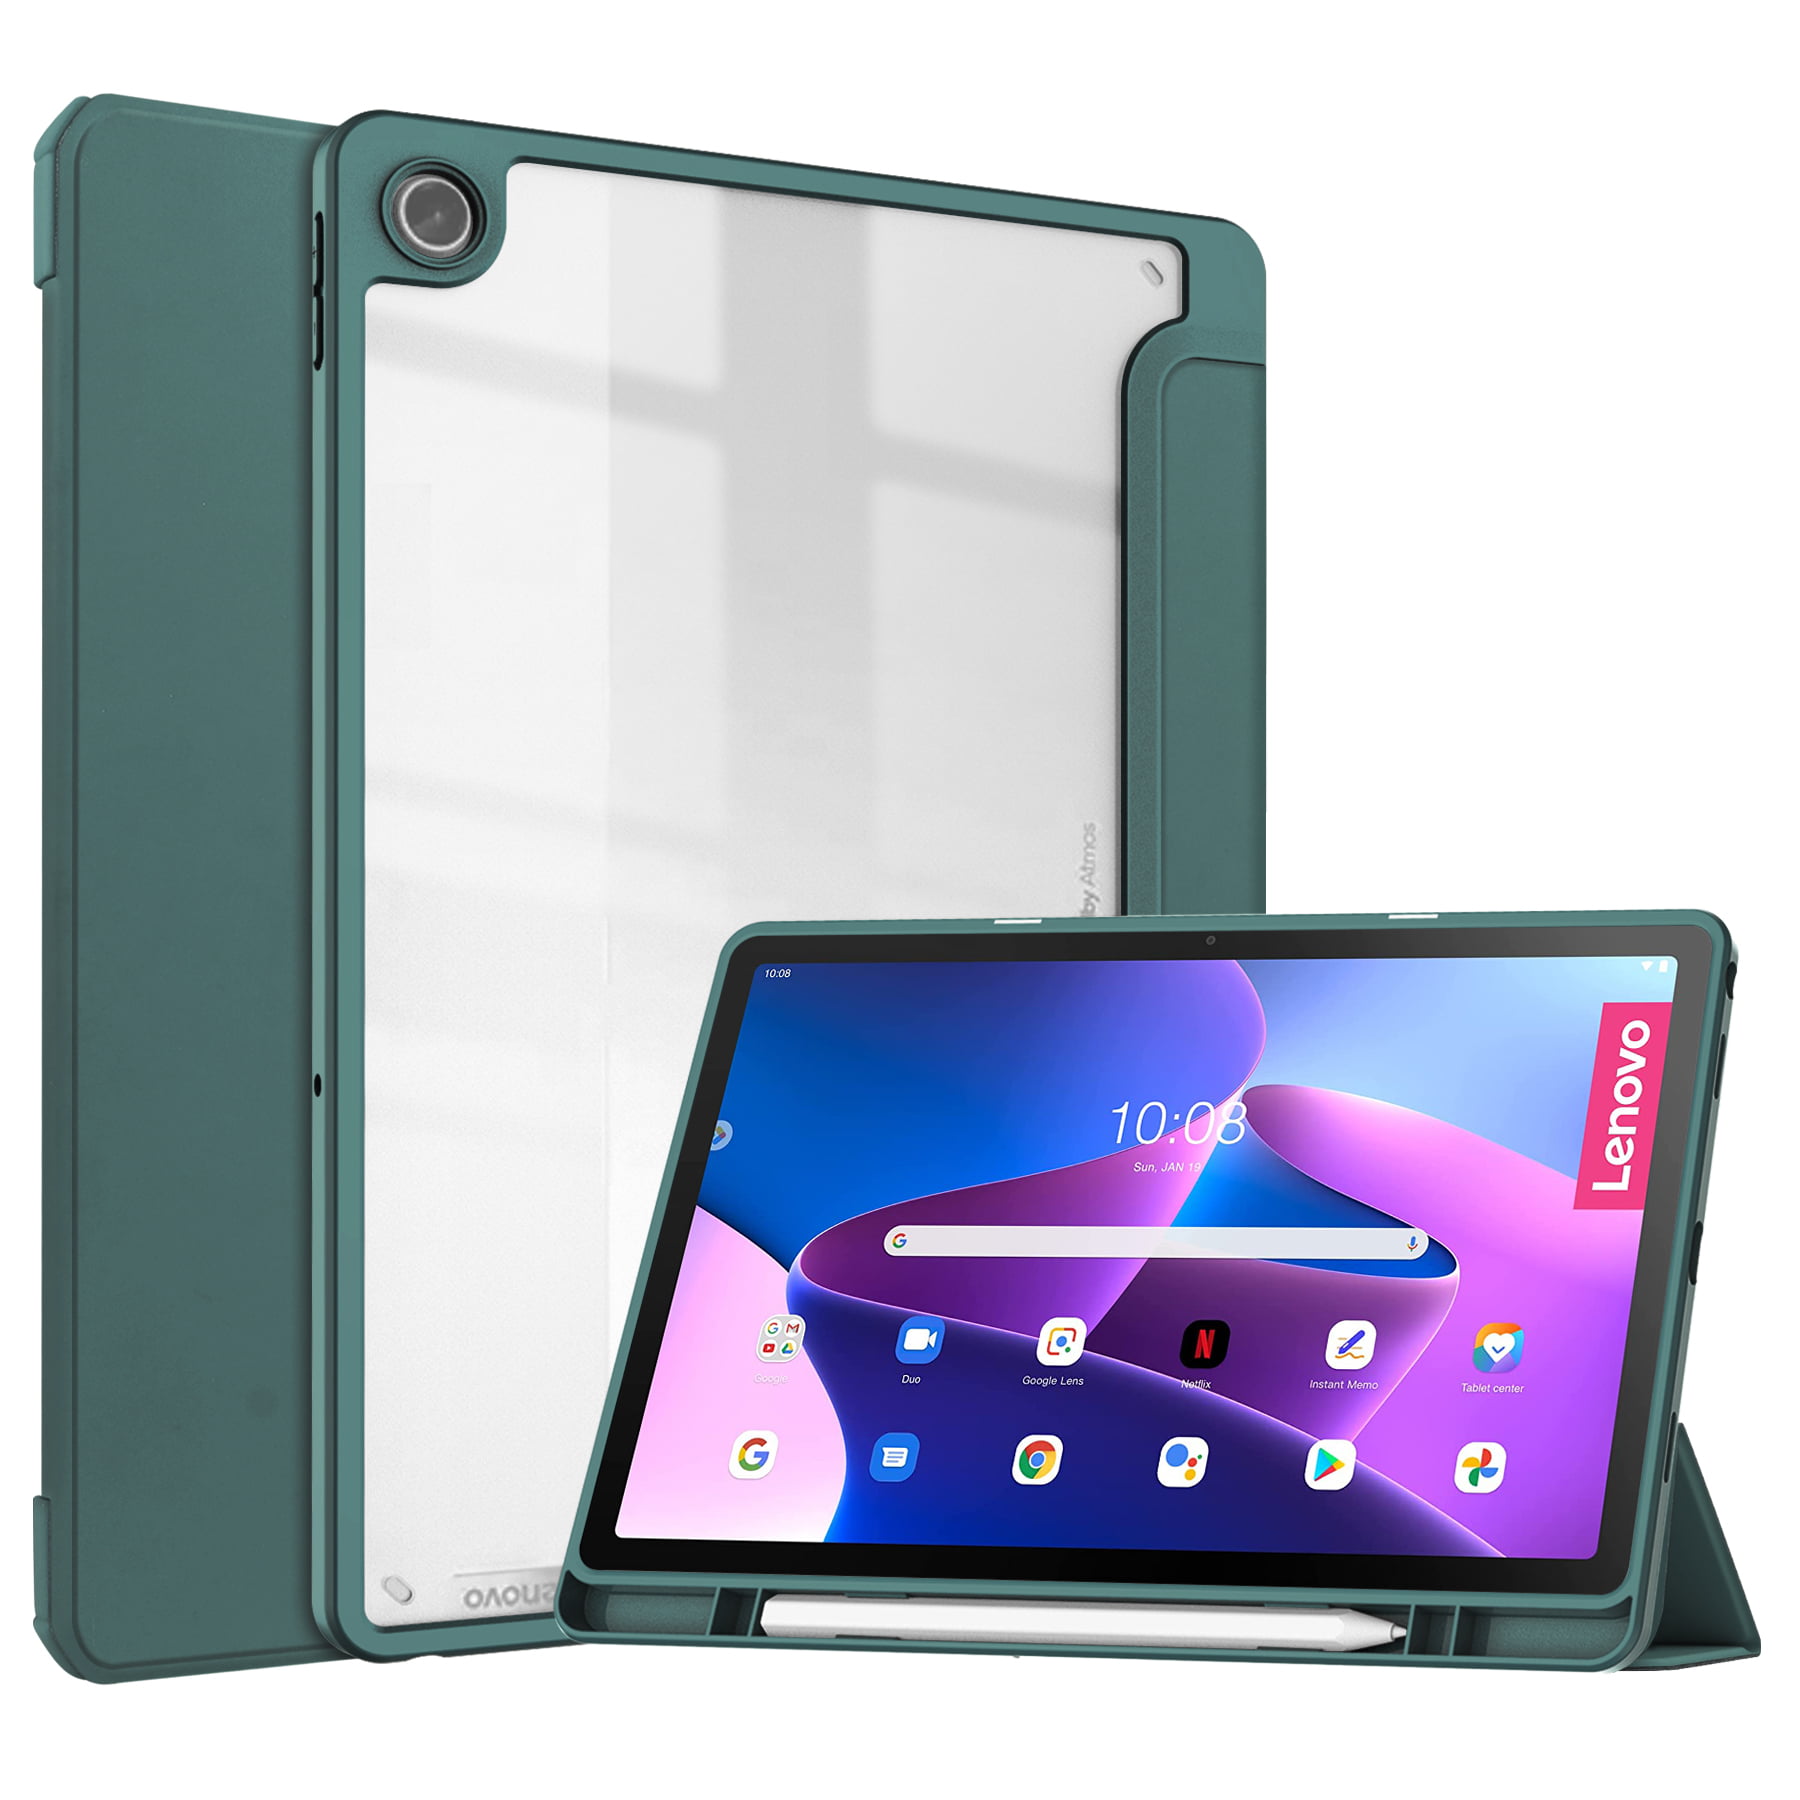 TECH CIRCLE Case for Lenovo Tab M10 (10.6") Tablet (3rd Generation) Release - Clear Back Cover Trifold Stand Protective Smart Flip Classic Case with Auto Sleep Function (Darkgreen) - Walmart.com